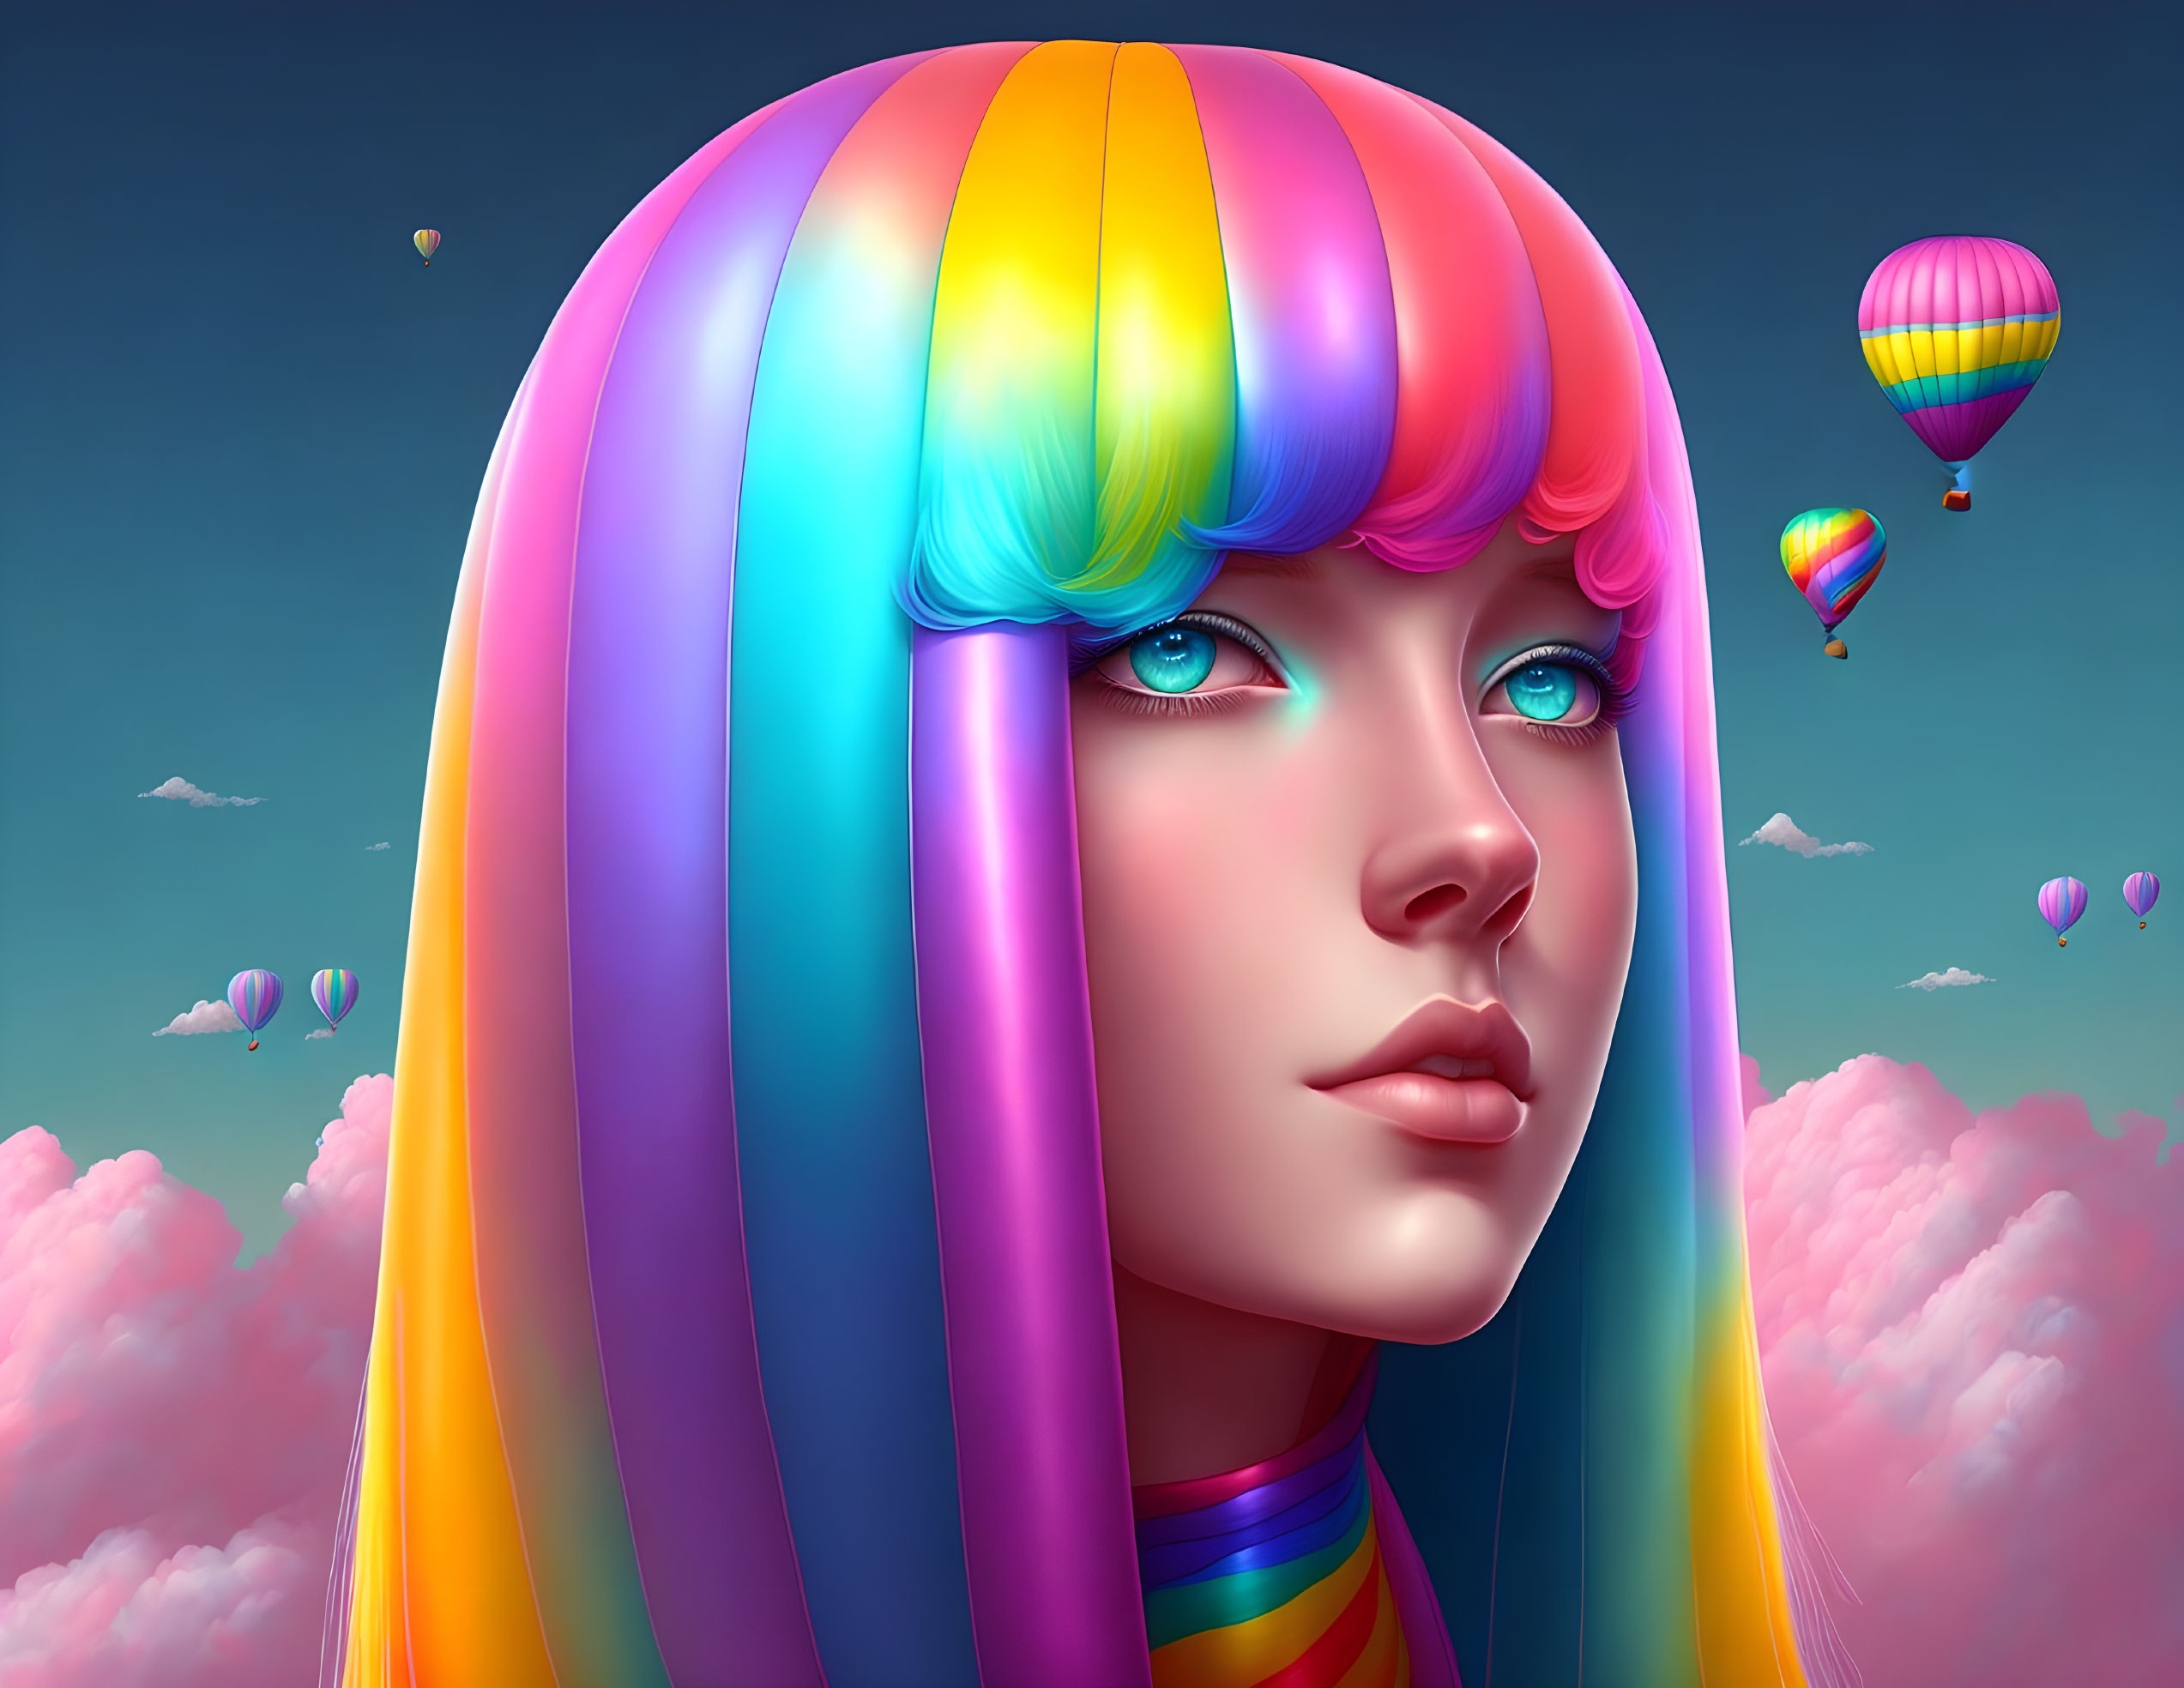 Colorful woman with rainbow hair in sky scene.